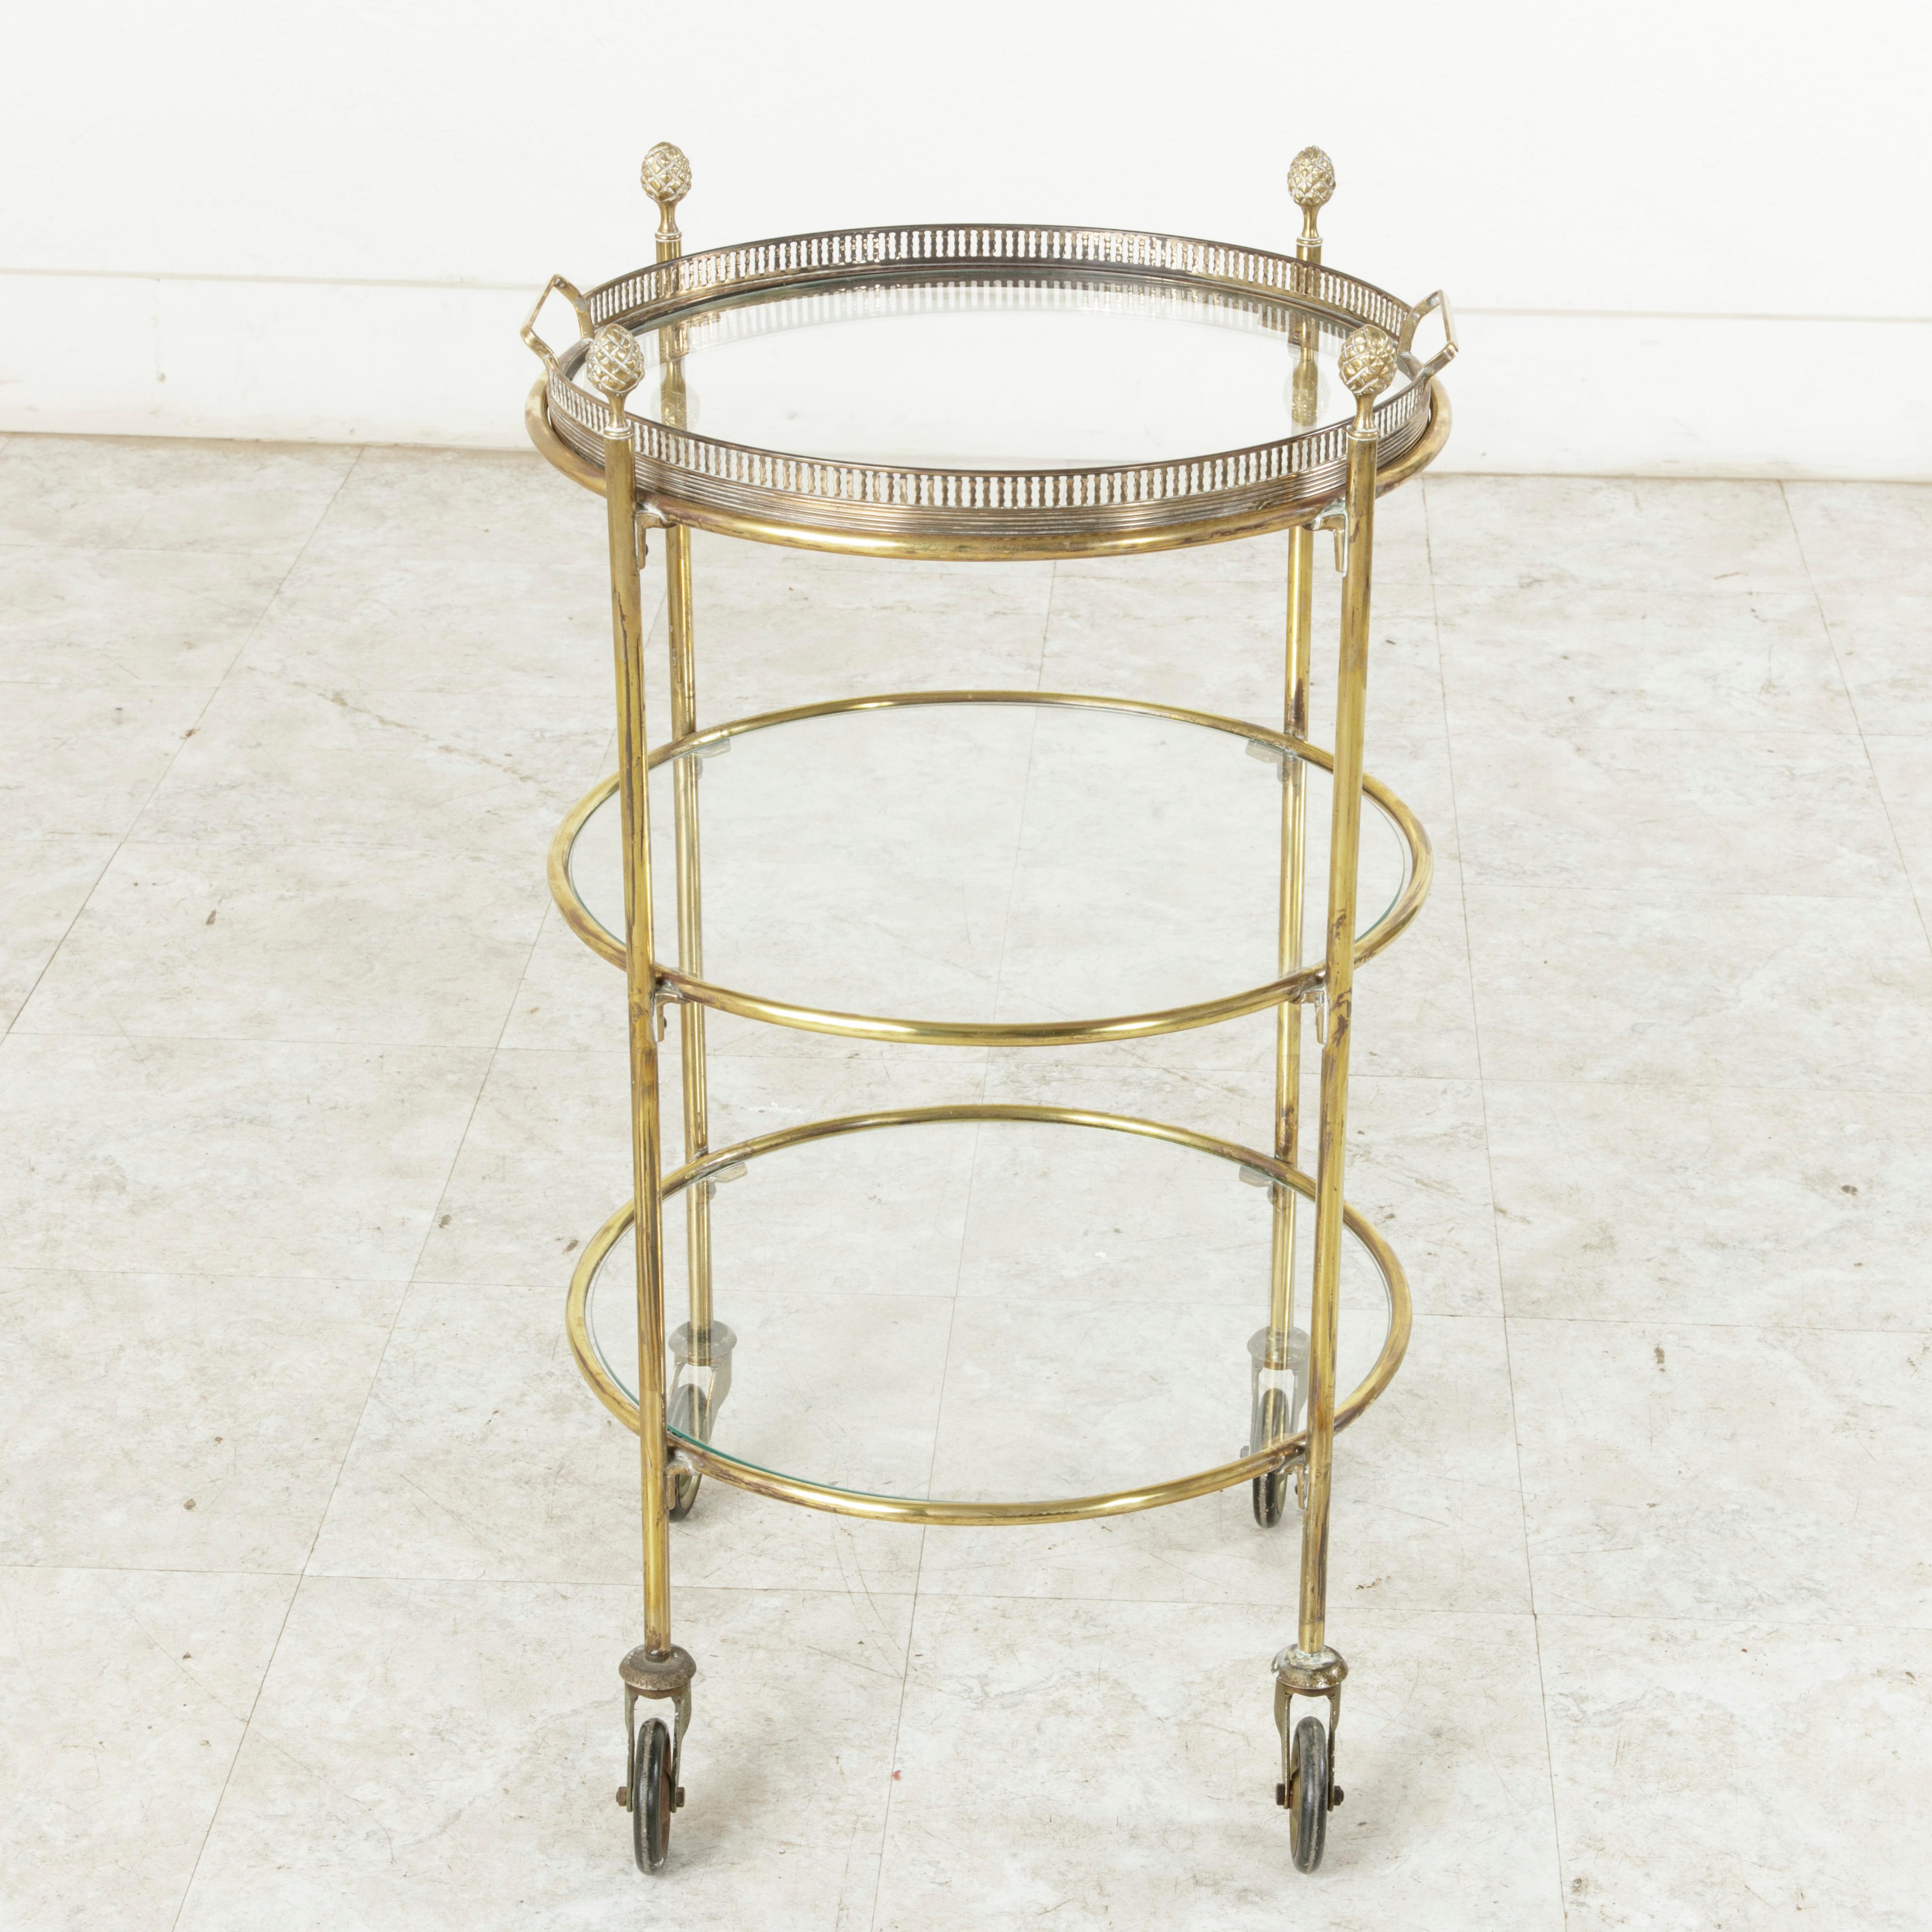 This midcentury French round brass bar cart features three glass shelves and a removable tray on top, with handles, surrounded by a pierced gallery. Its four legs rest on casters and are finished with Louis XVI style pine cone finials. With only a